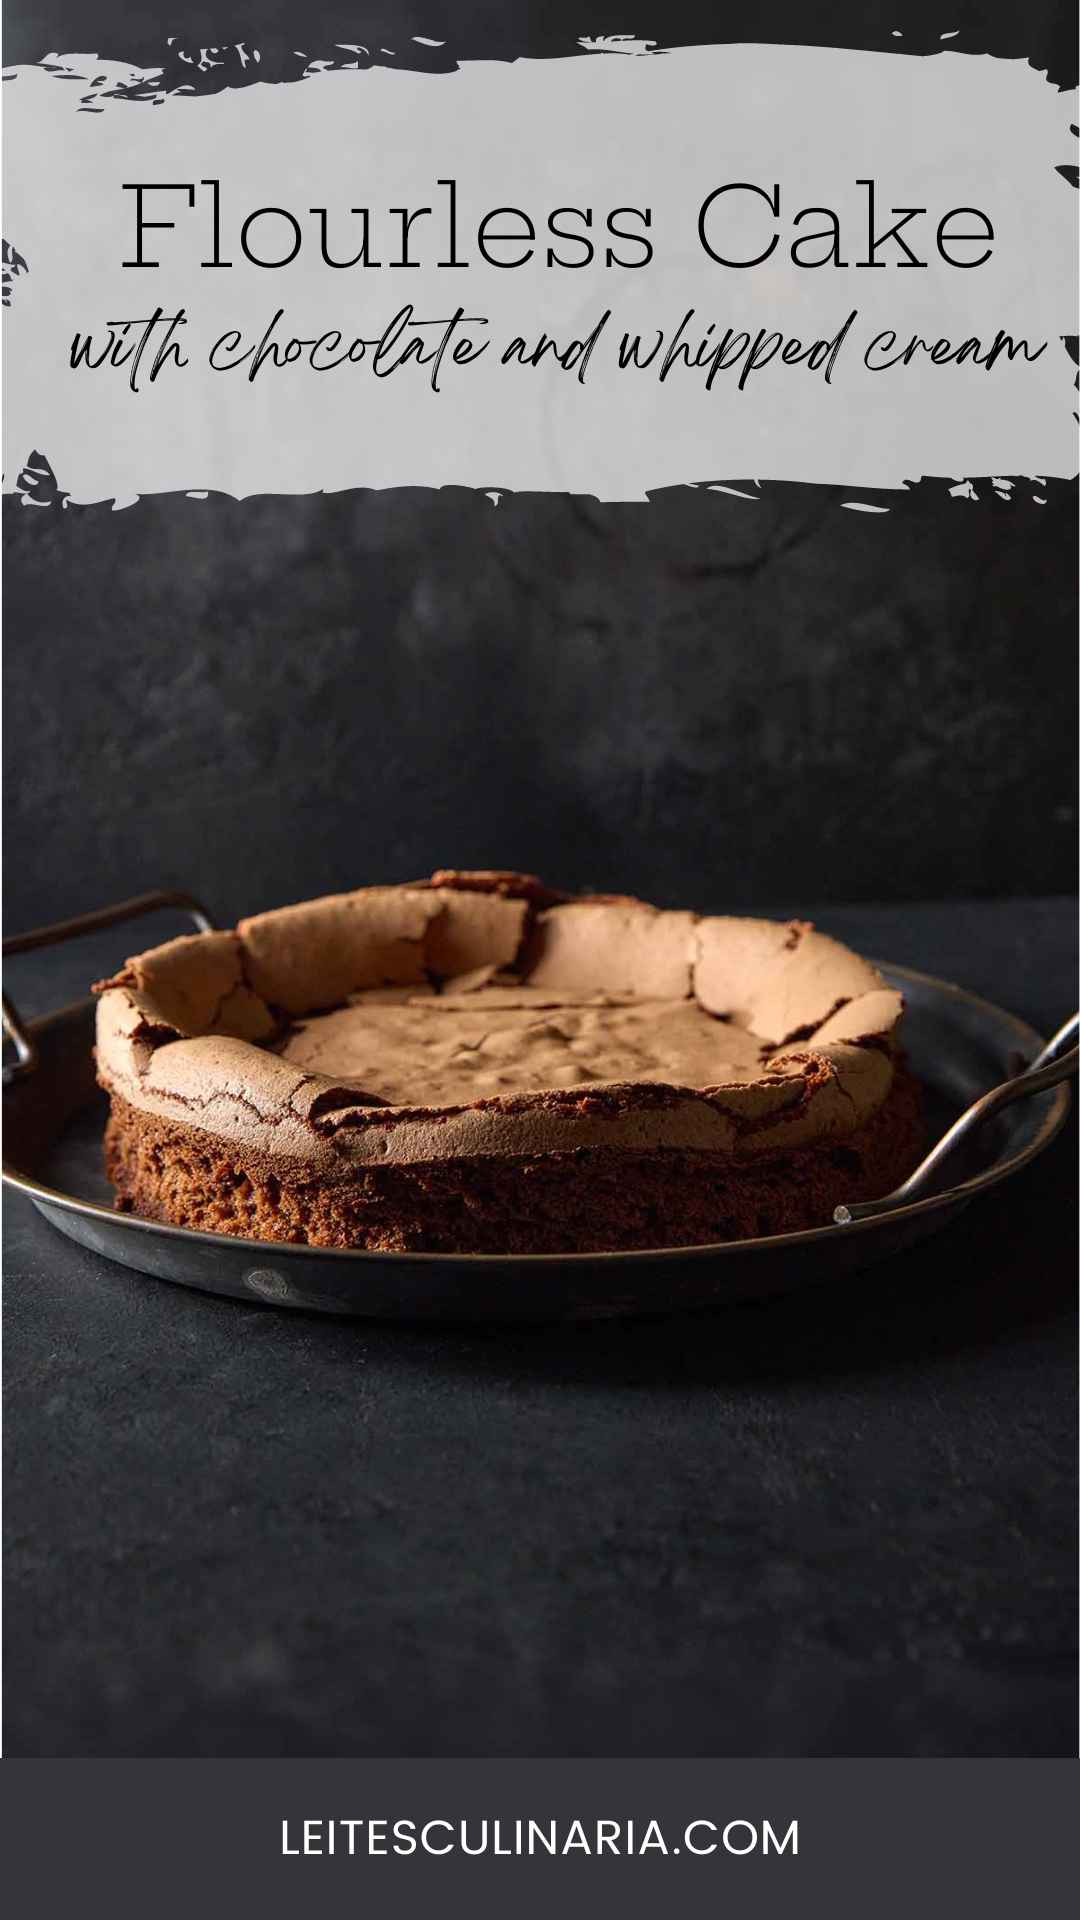 A flourless chocolate cloud cake with a sunken middle on a metal platter.